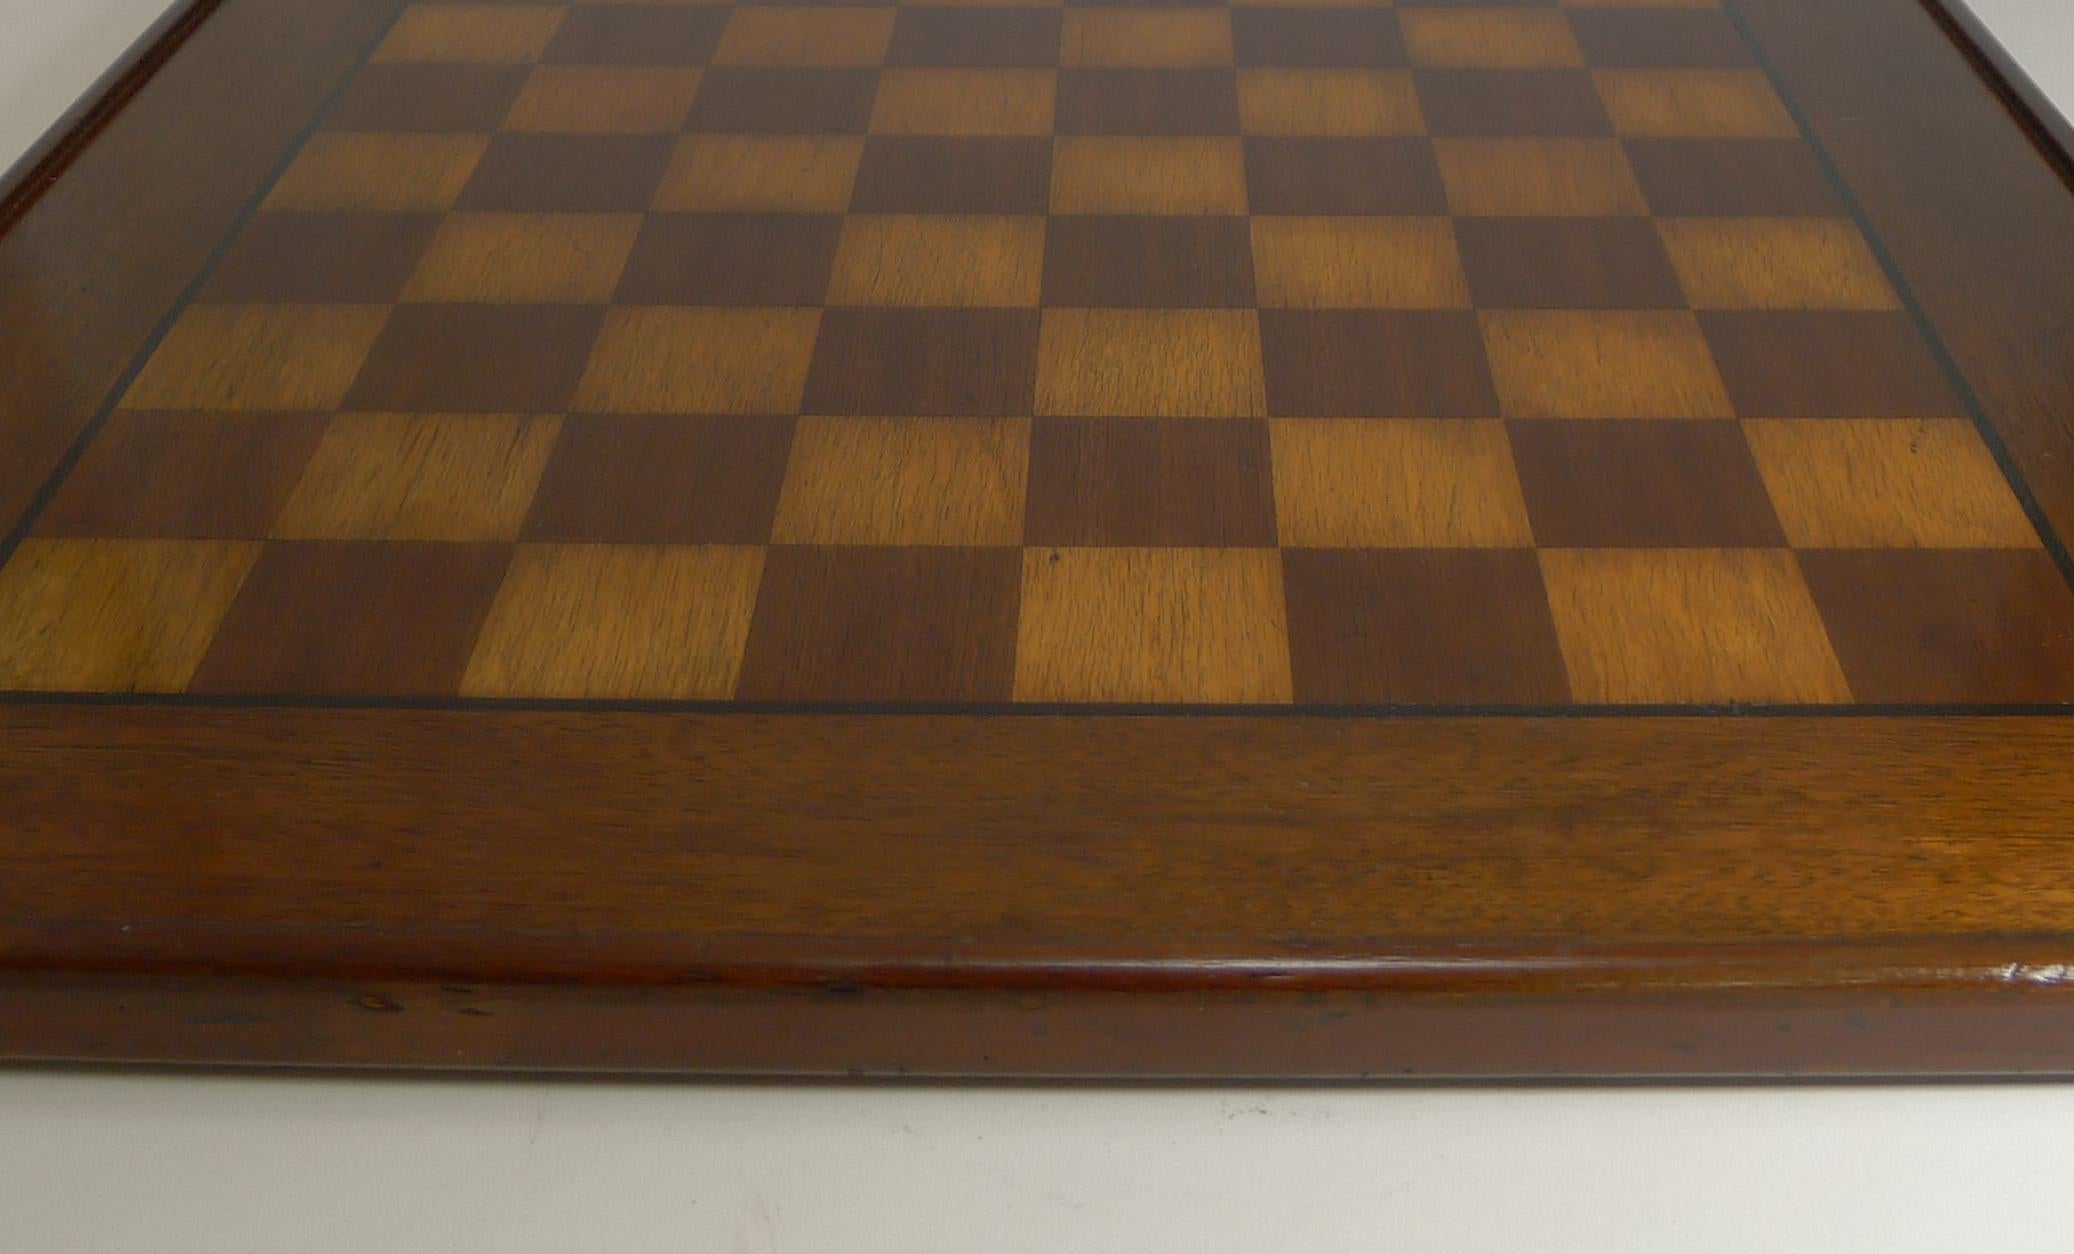 A good sized Edwardian mahogany chess board dating to circa 1900-1910.

Excellent condition measuring: 19